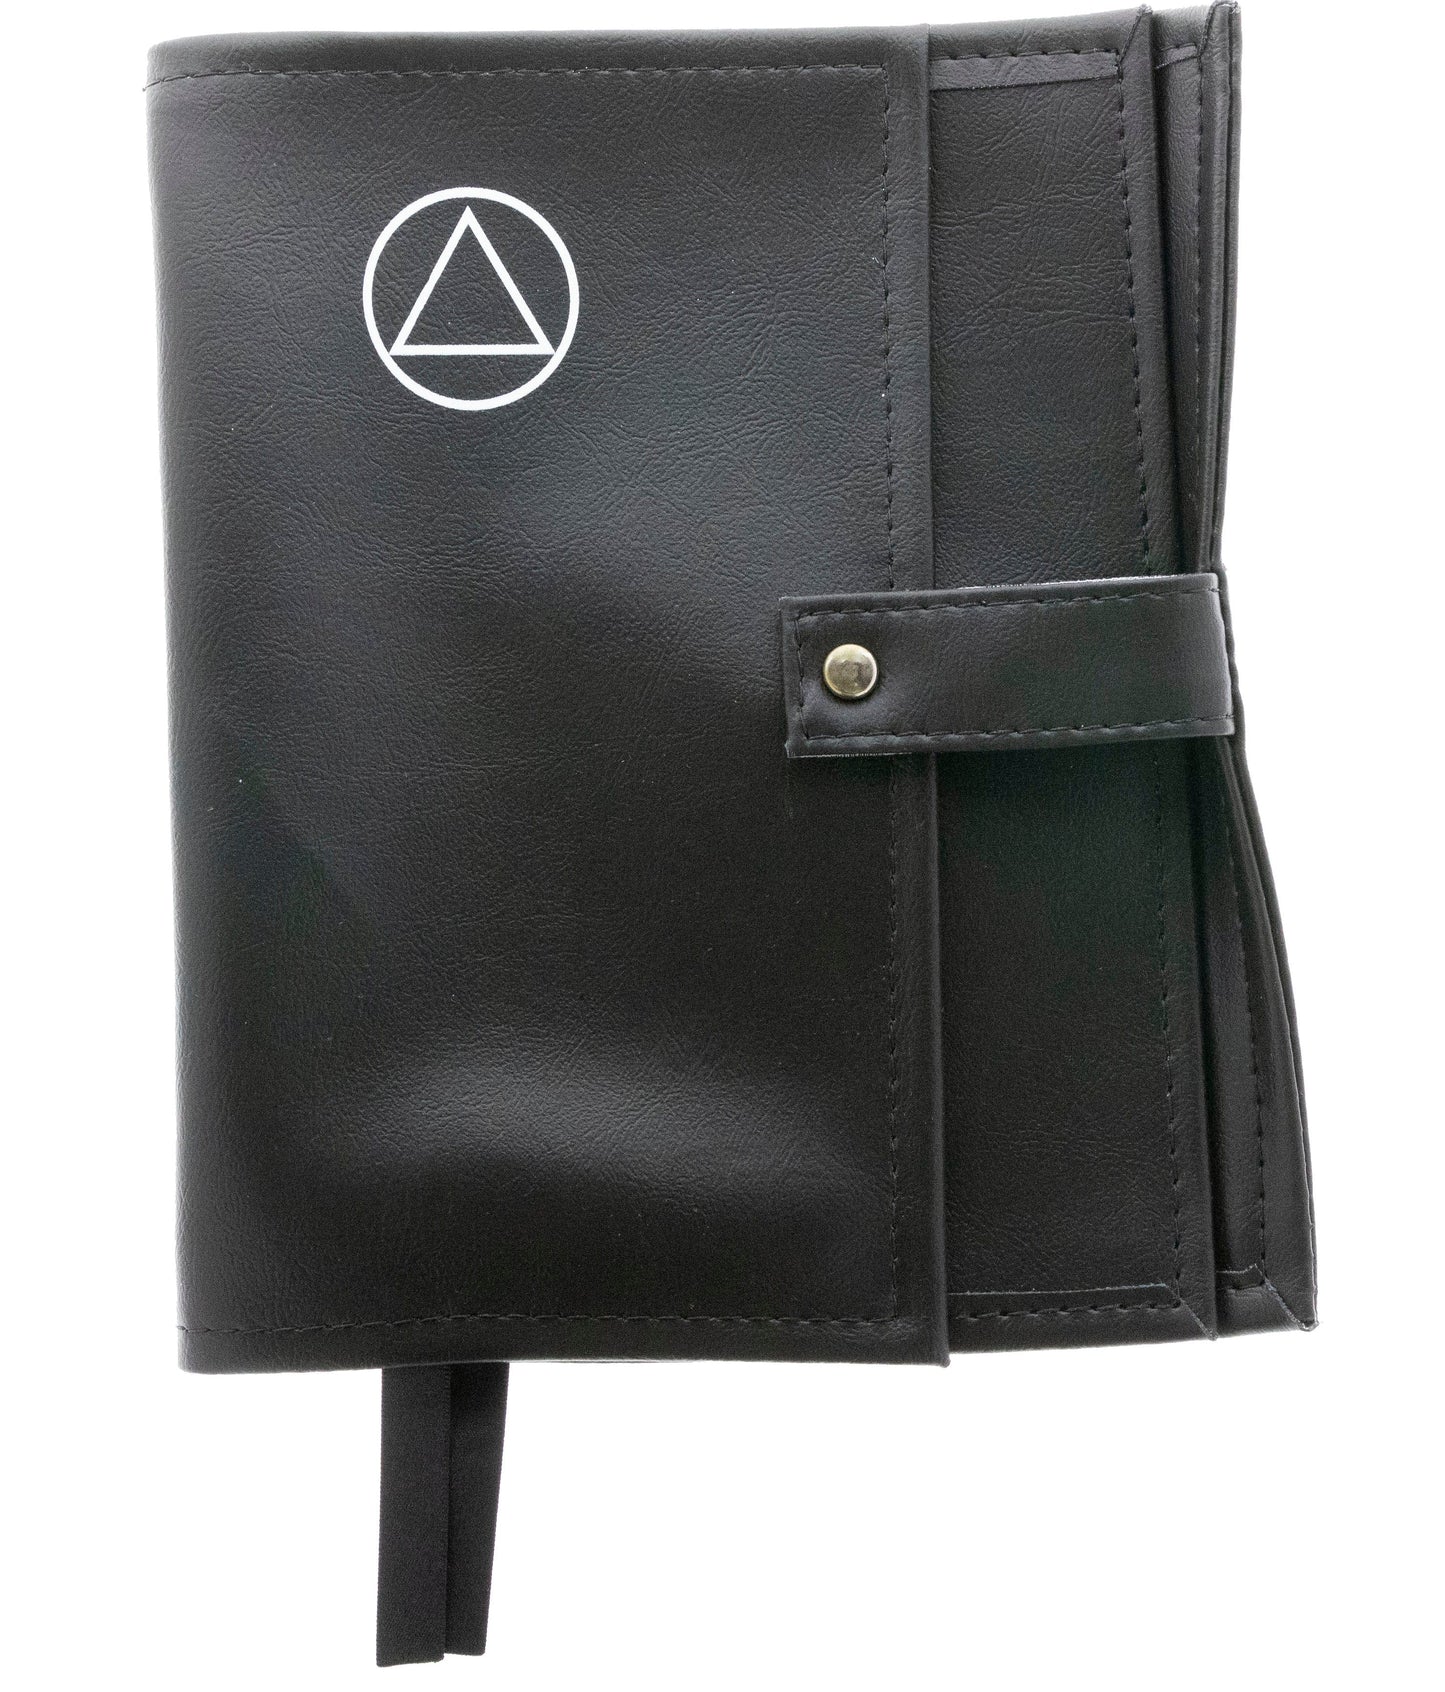 AA Black Double Book Cover With Circle Triangle